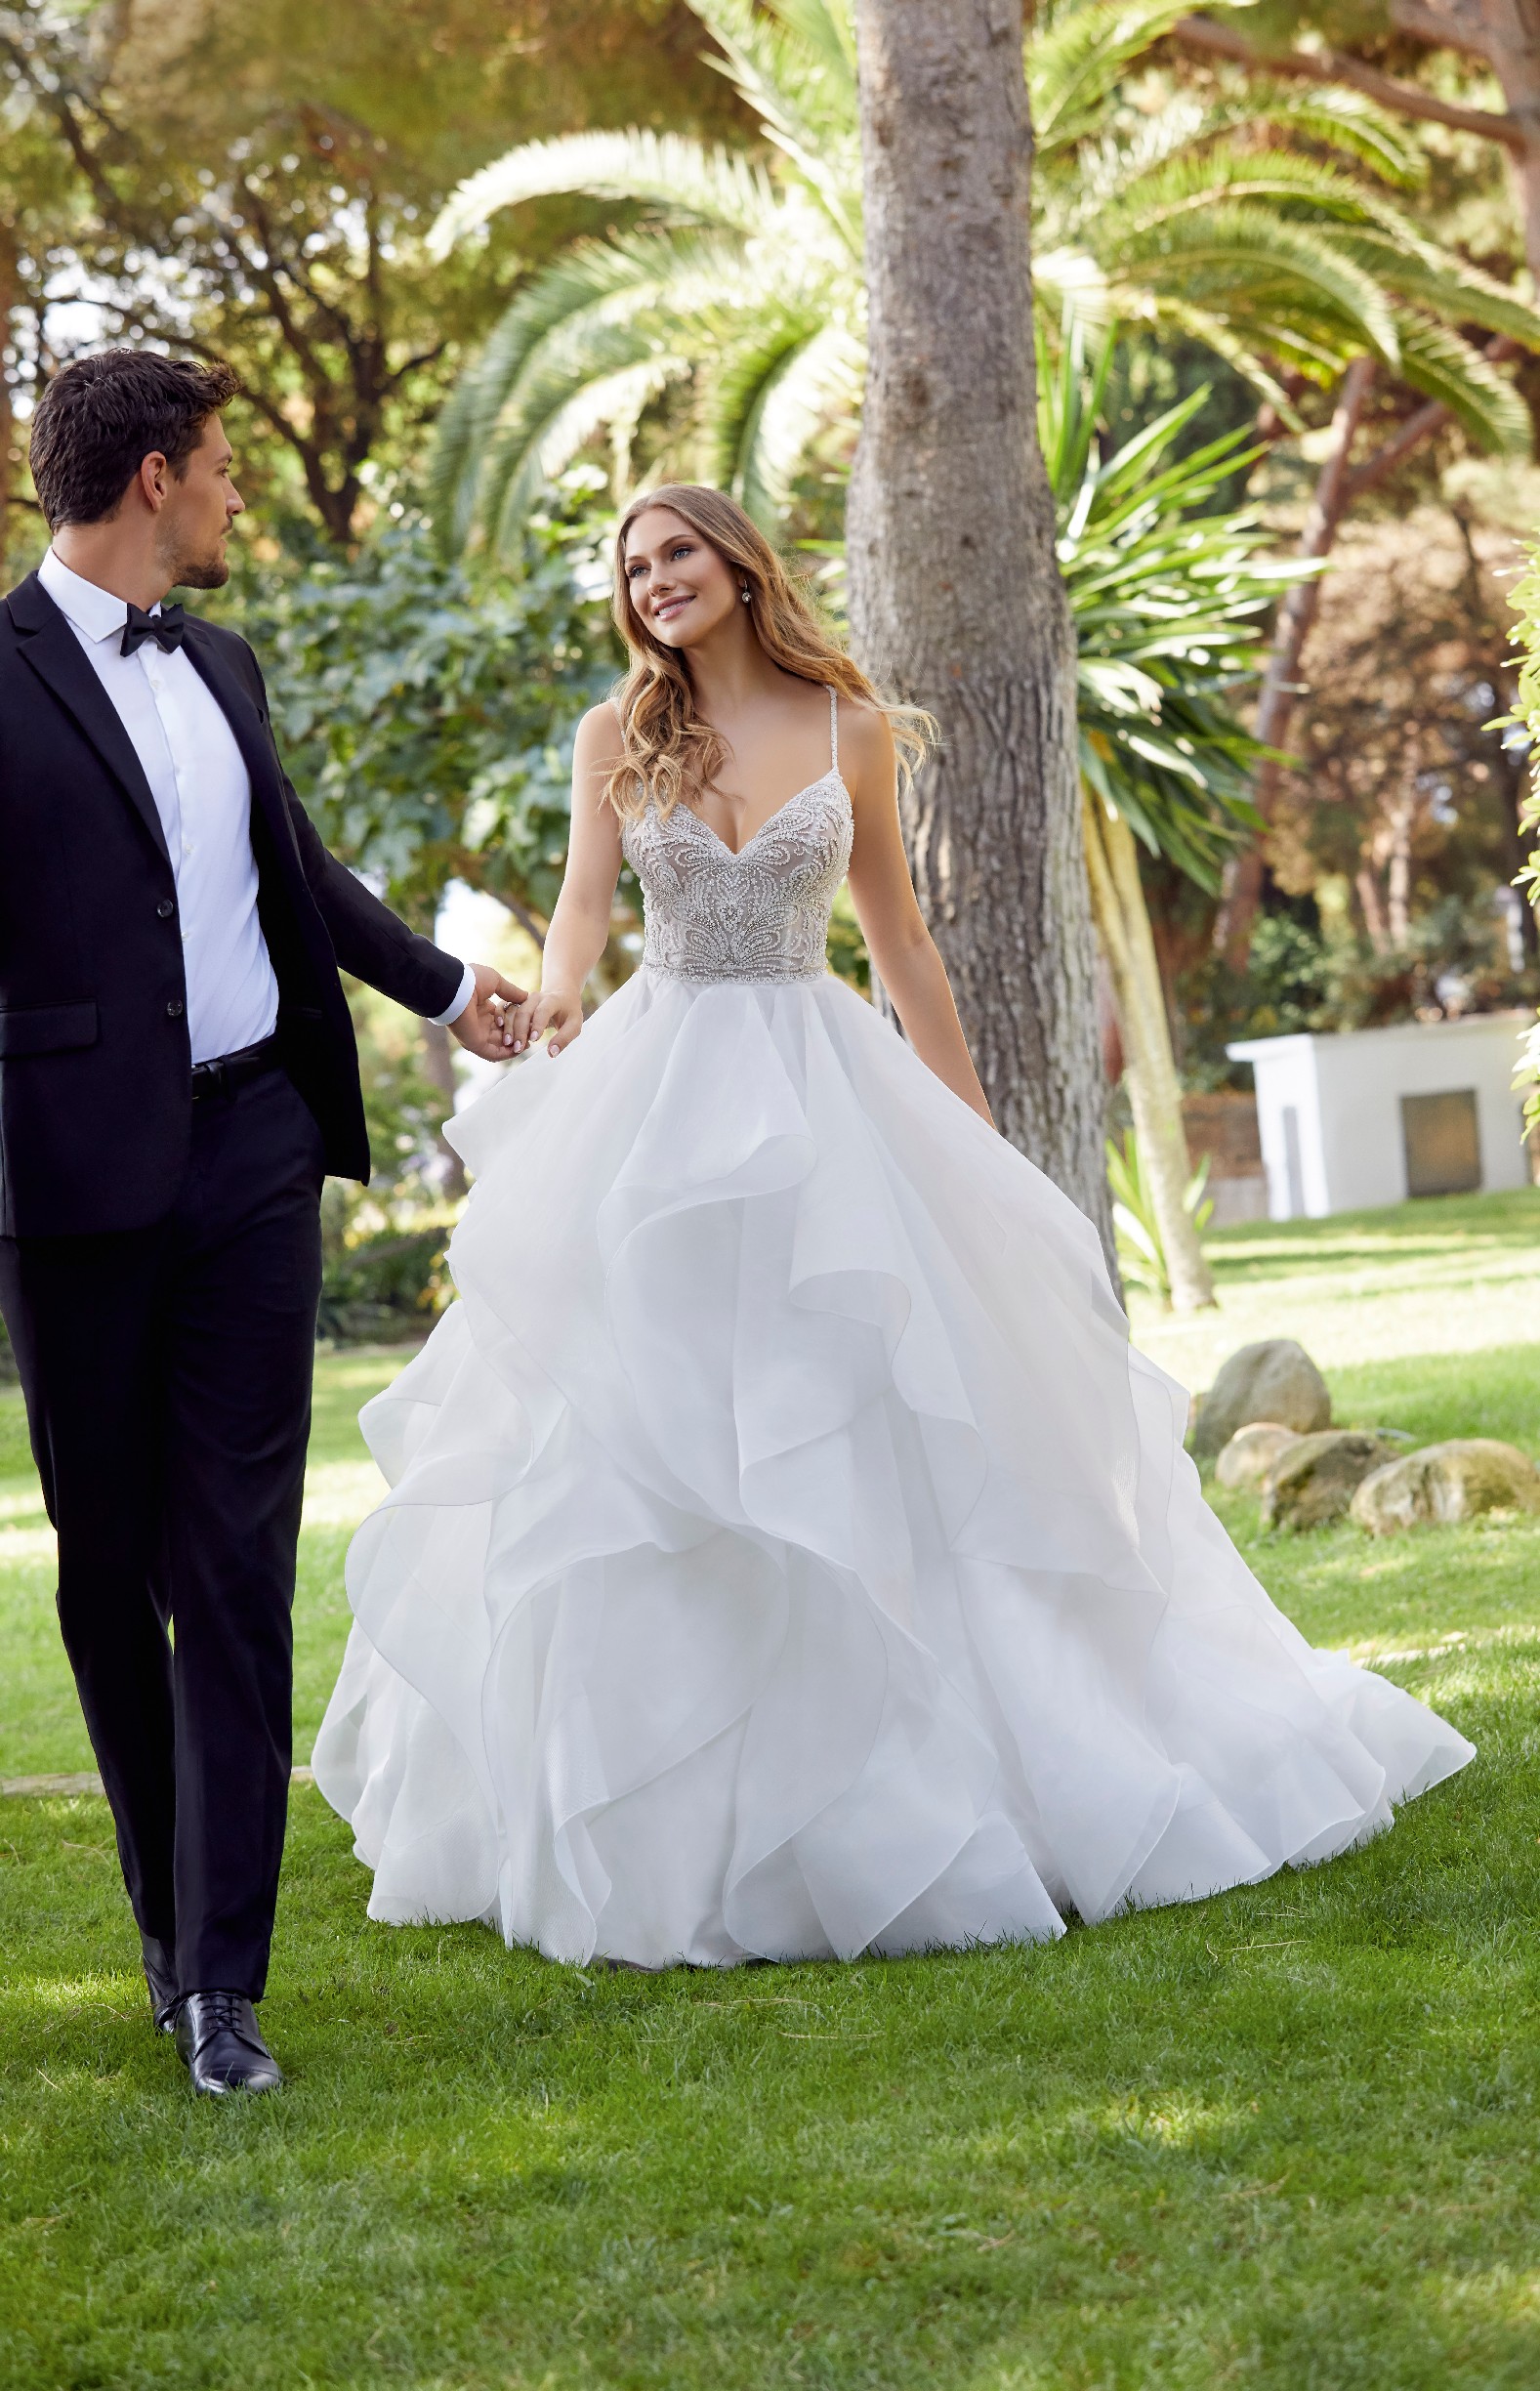 Blonde woman wearing ballgown style wedding dress with beaded bodice and spaghetti straps walking through park with palm trees with man in suit